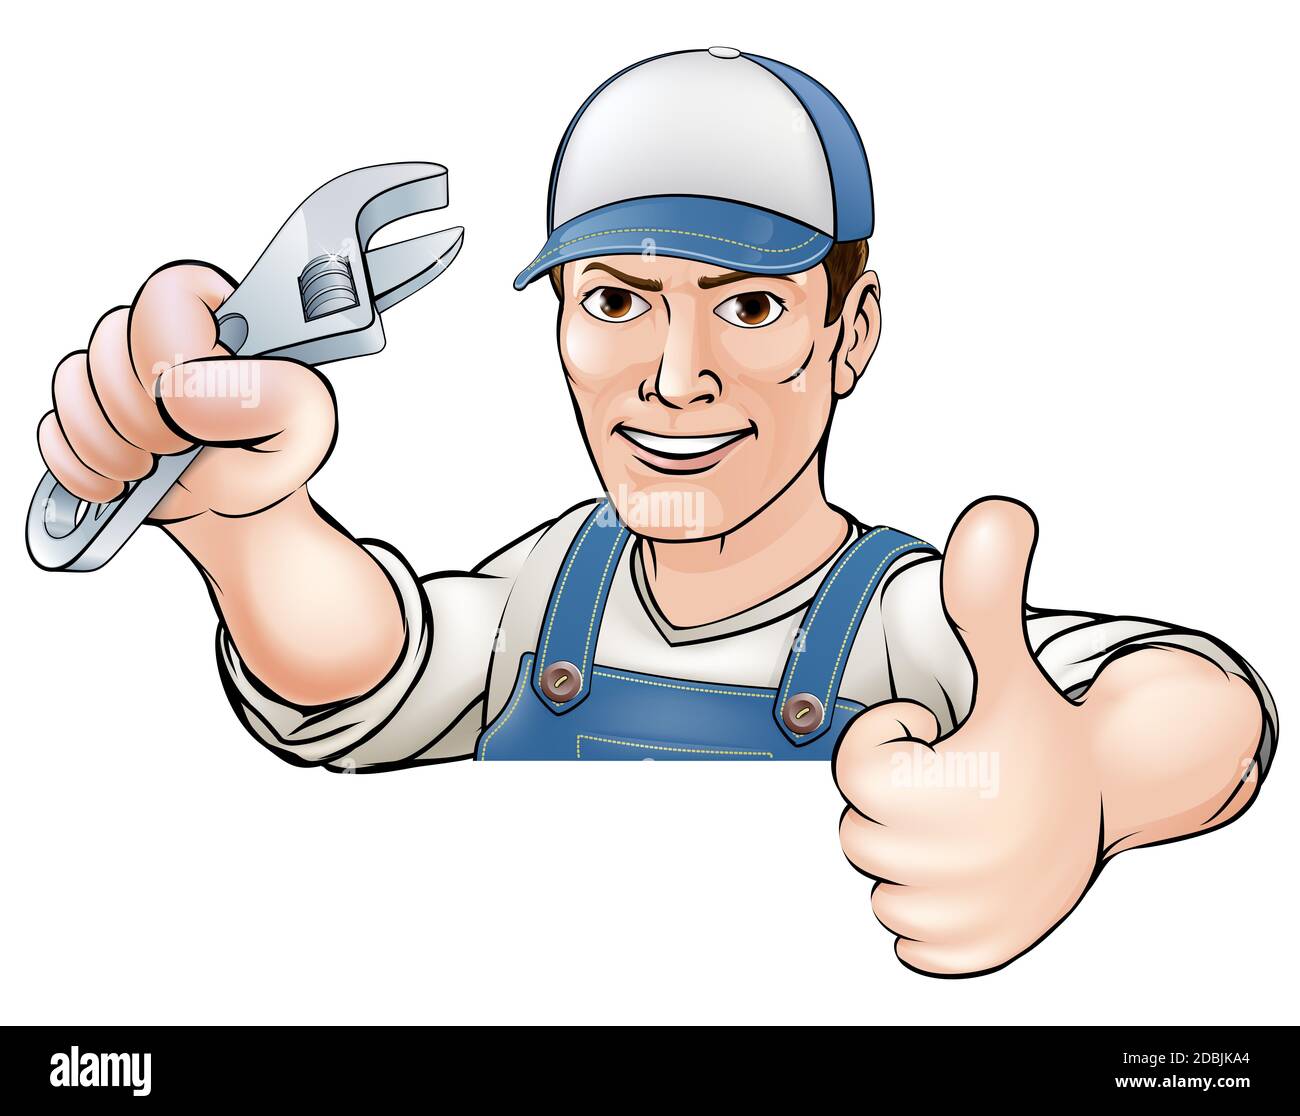 A cartoon mechanic or plumber giving a thumbs up Stock Photo